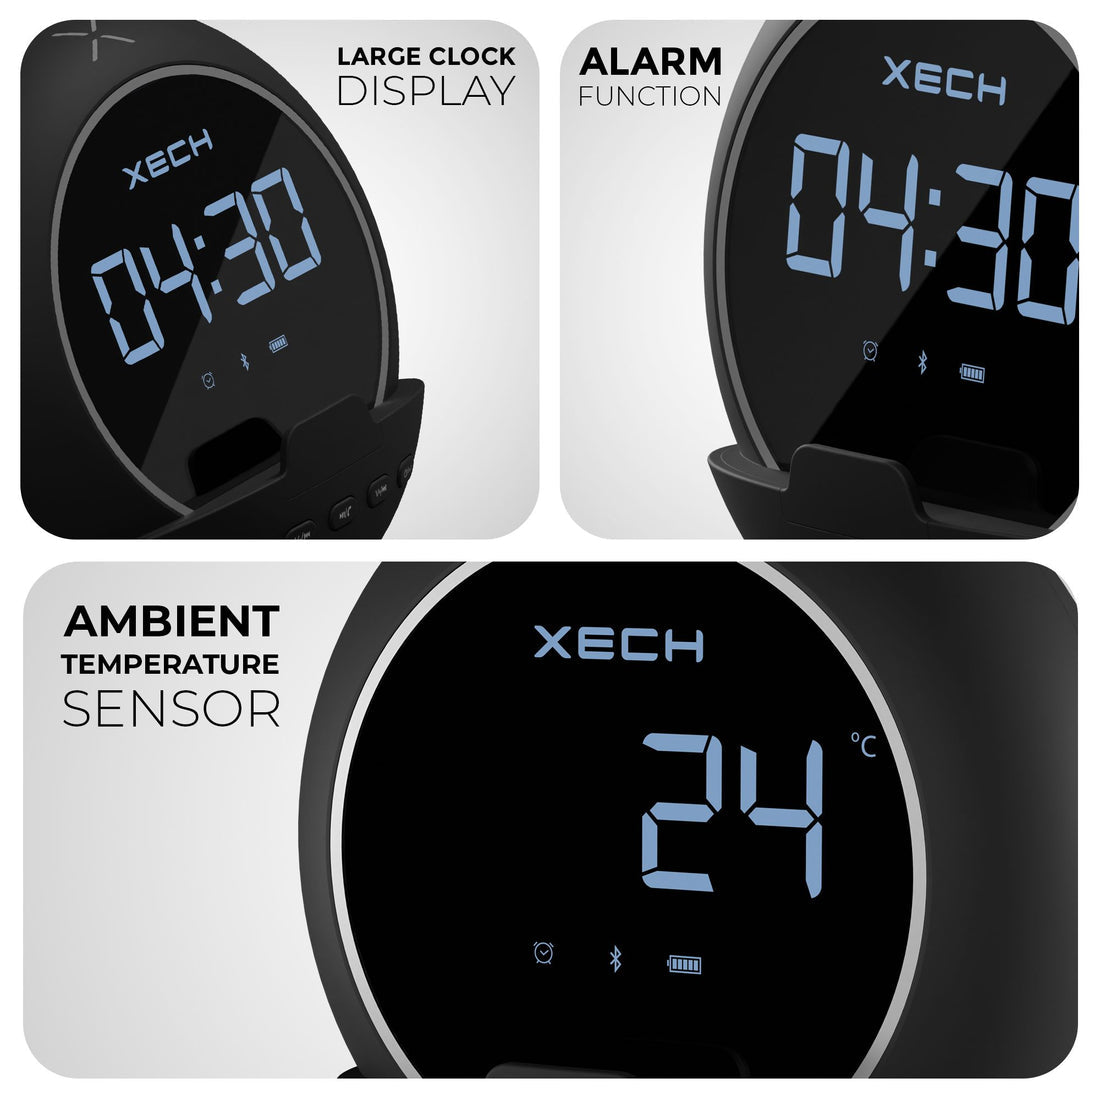 Personalized Wireless Bluetooth Speaker, Digital Clock, and Alarm - For Corporate Gifting, Office Gift Item, Return Gift, Event Gifts, Promotions